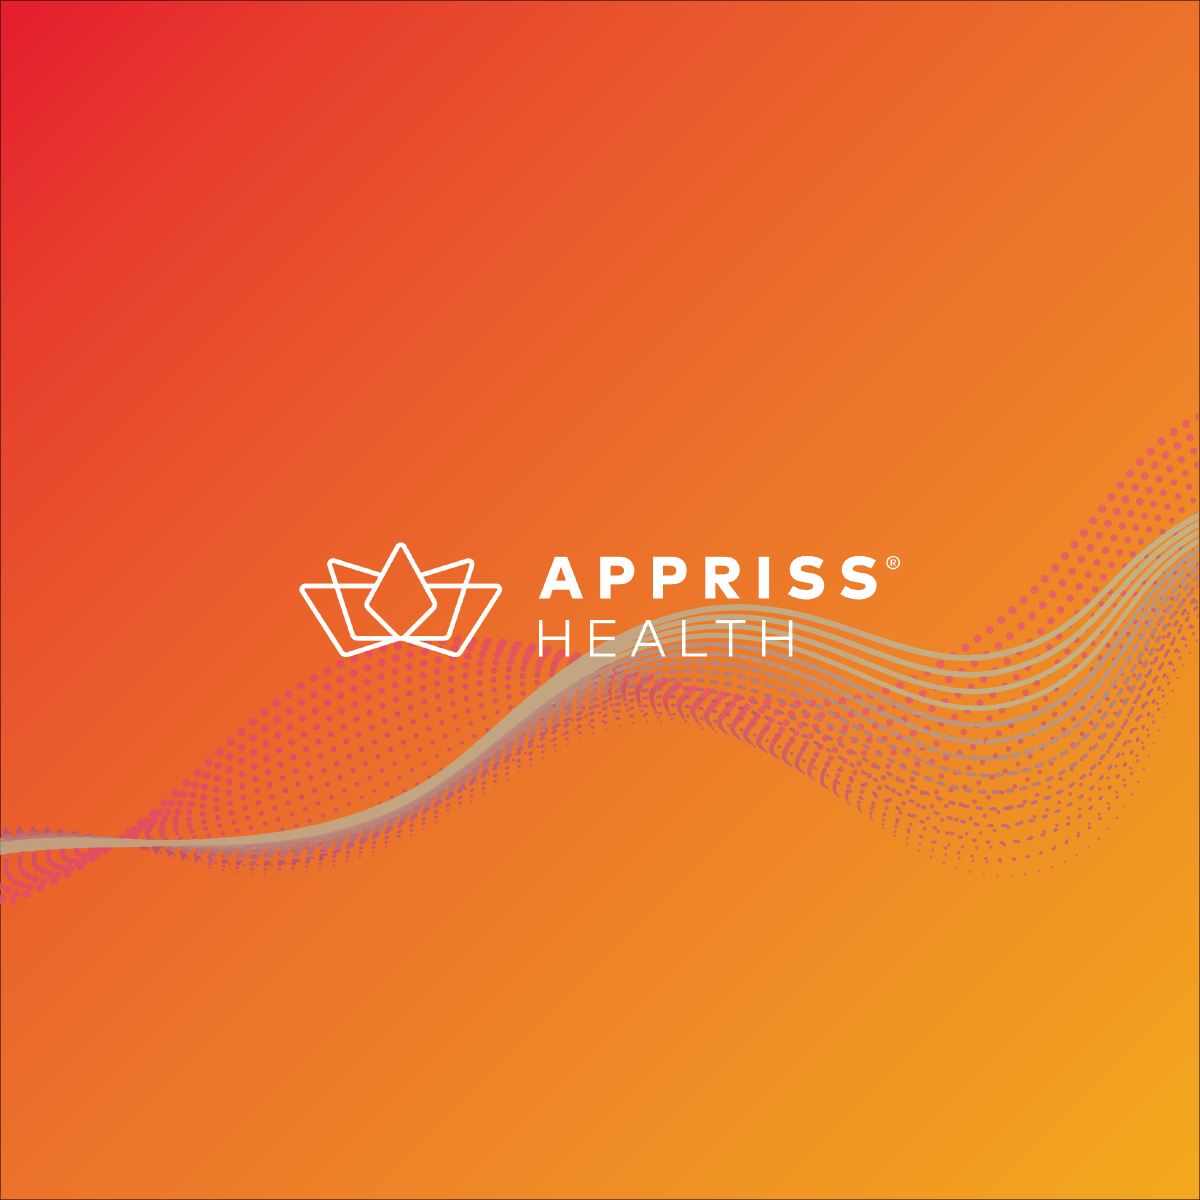 Appriss Logo - Identify, prevent and manage substance use disorders.